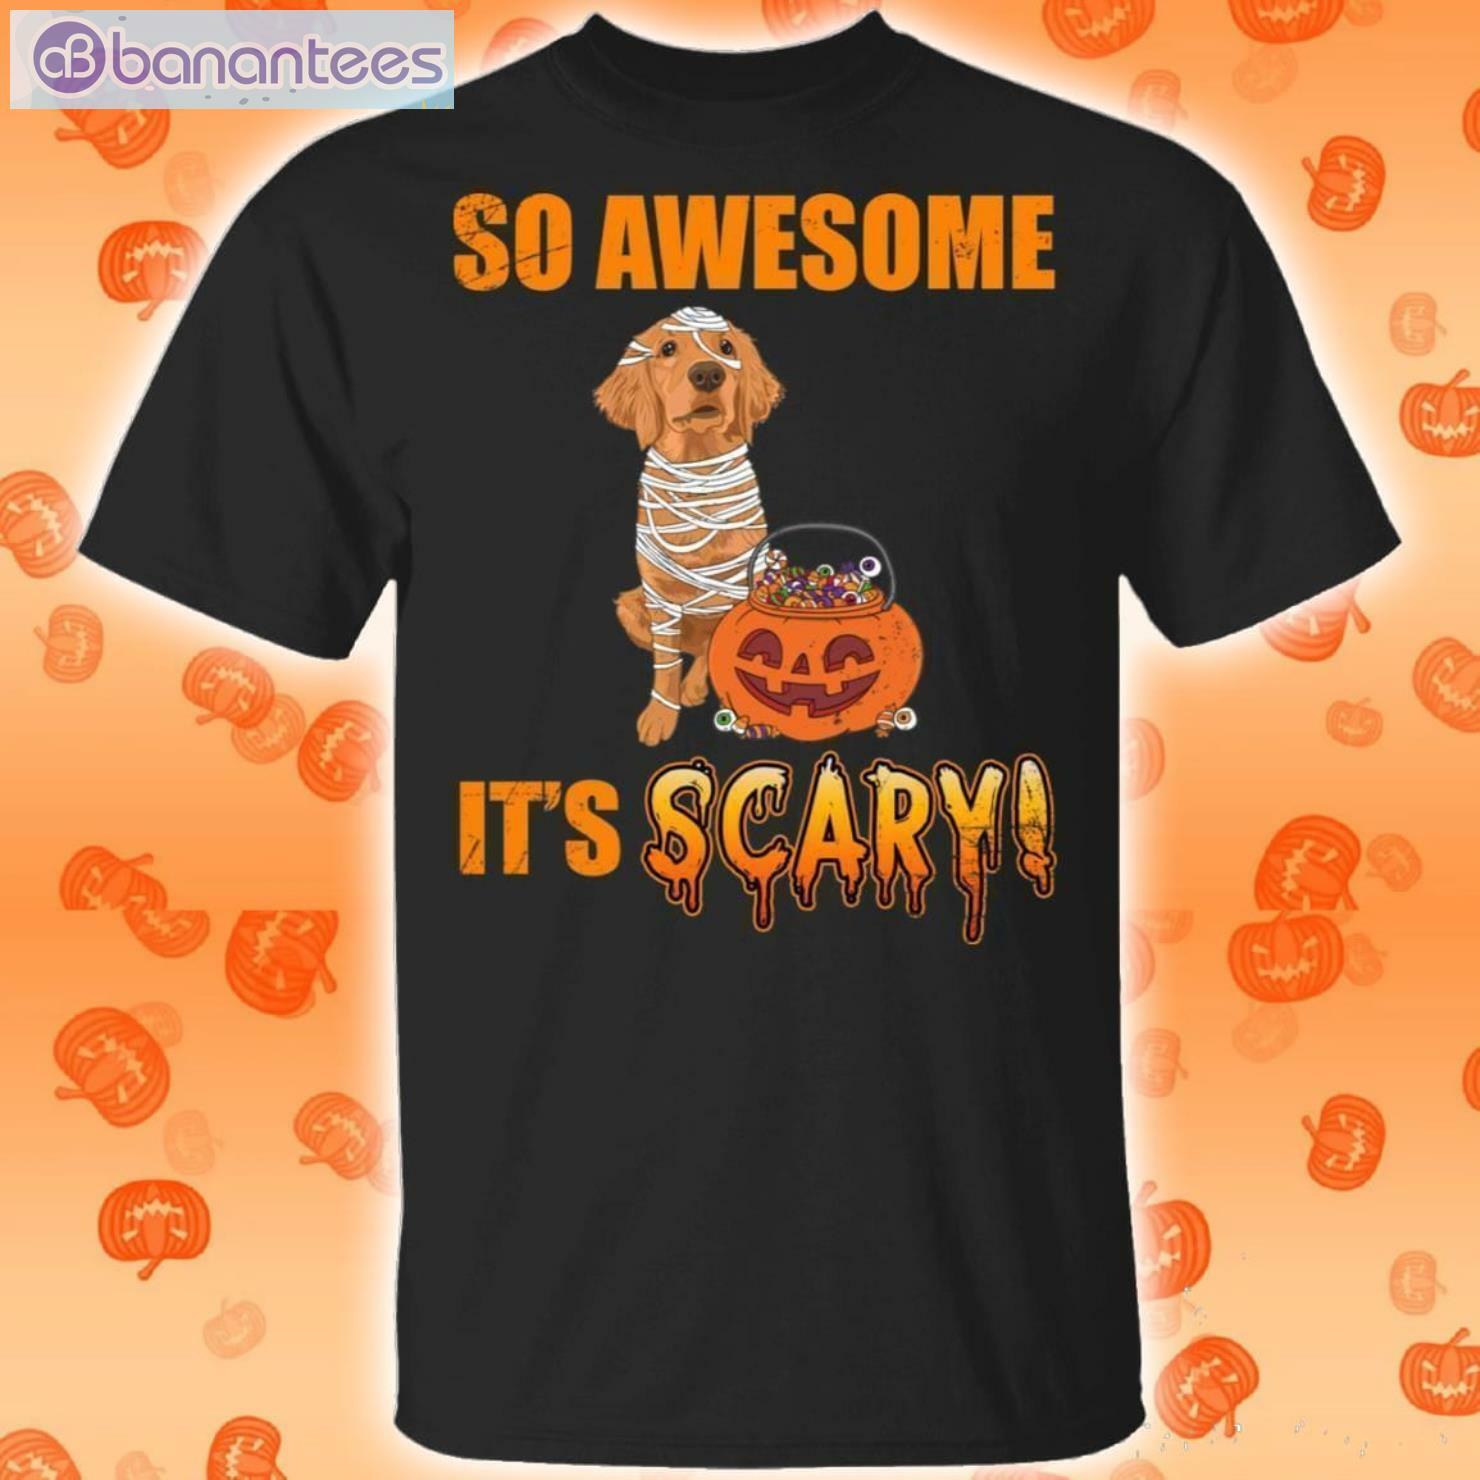 So Awesome It's Scary T-Shirt With Golden Retriever Halloween Product Photo 1